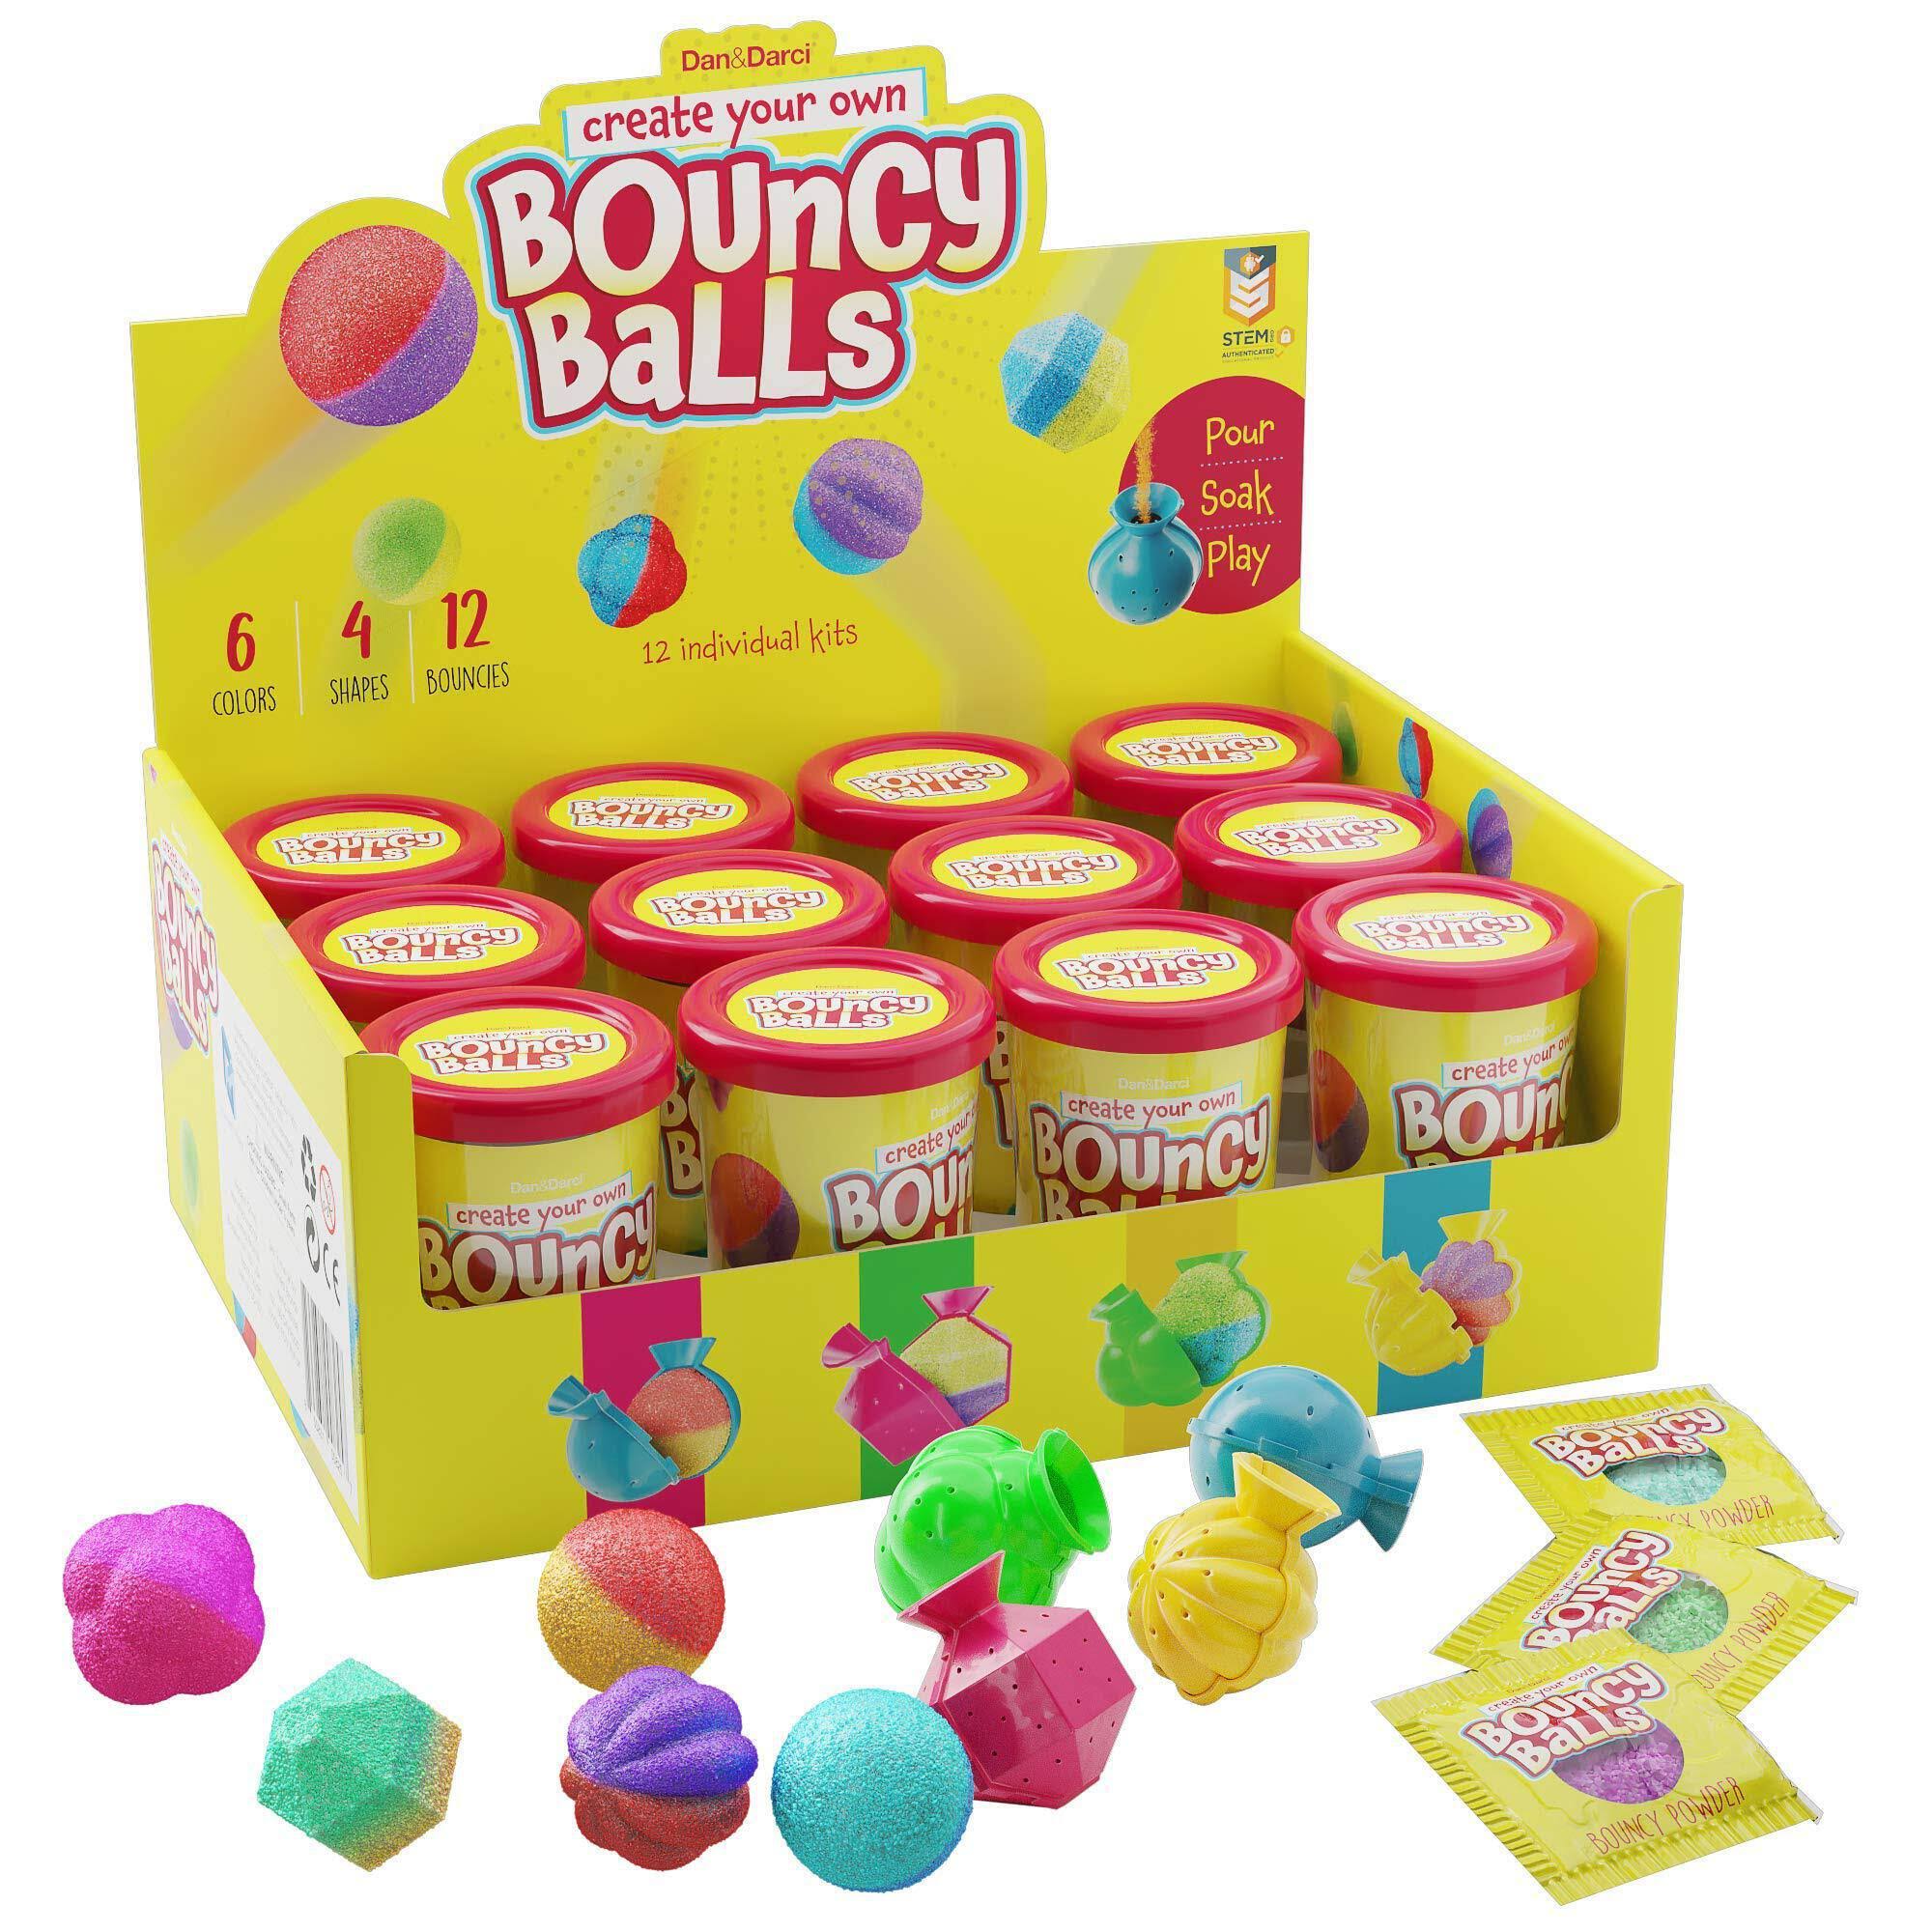 Make Your Own Bouncy Ball Kit - 12 Individual Kits - Science Party Favors - Cool Birthday Parties Activities for Kids - Create 12 Balls - Fun DIY